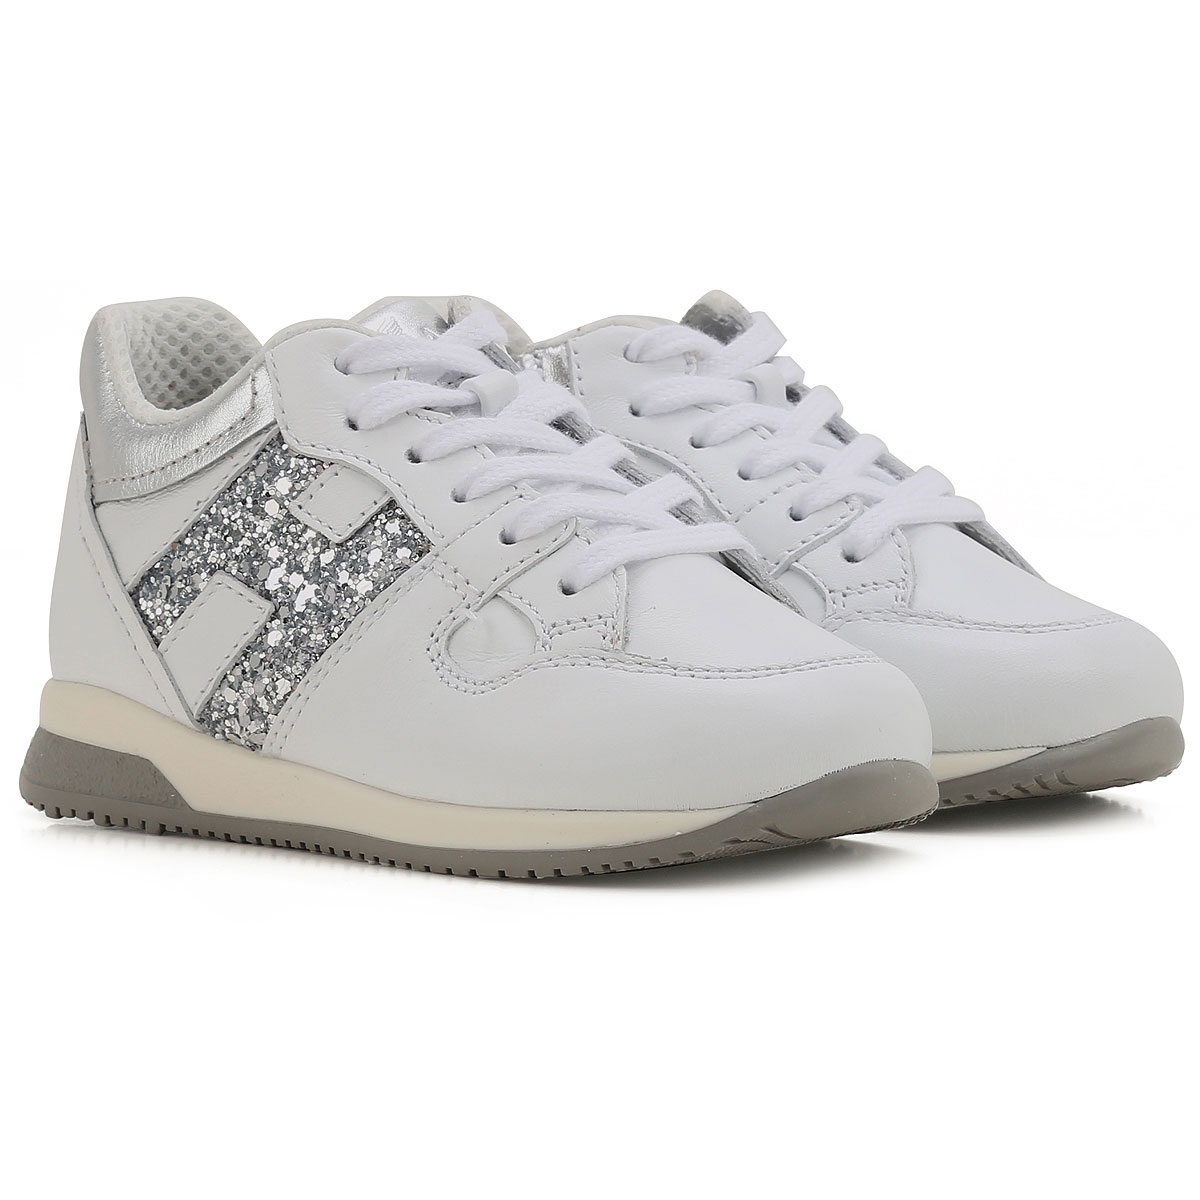 Chaussures Hogan Fille Outlet, Blanc, Cuir, 2017, 24 26 27